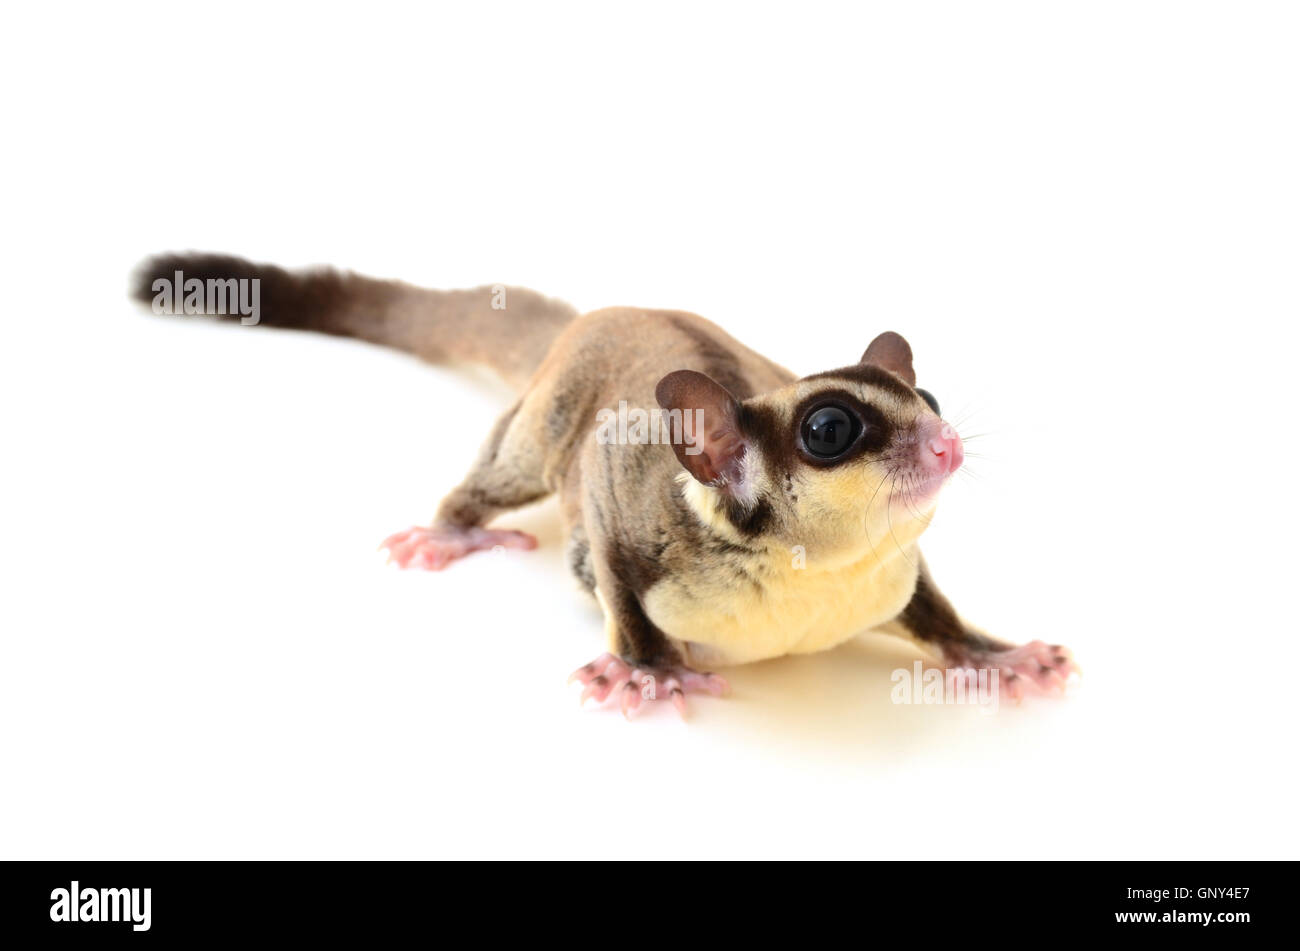 Flying squirrel Stock Photo